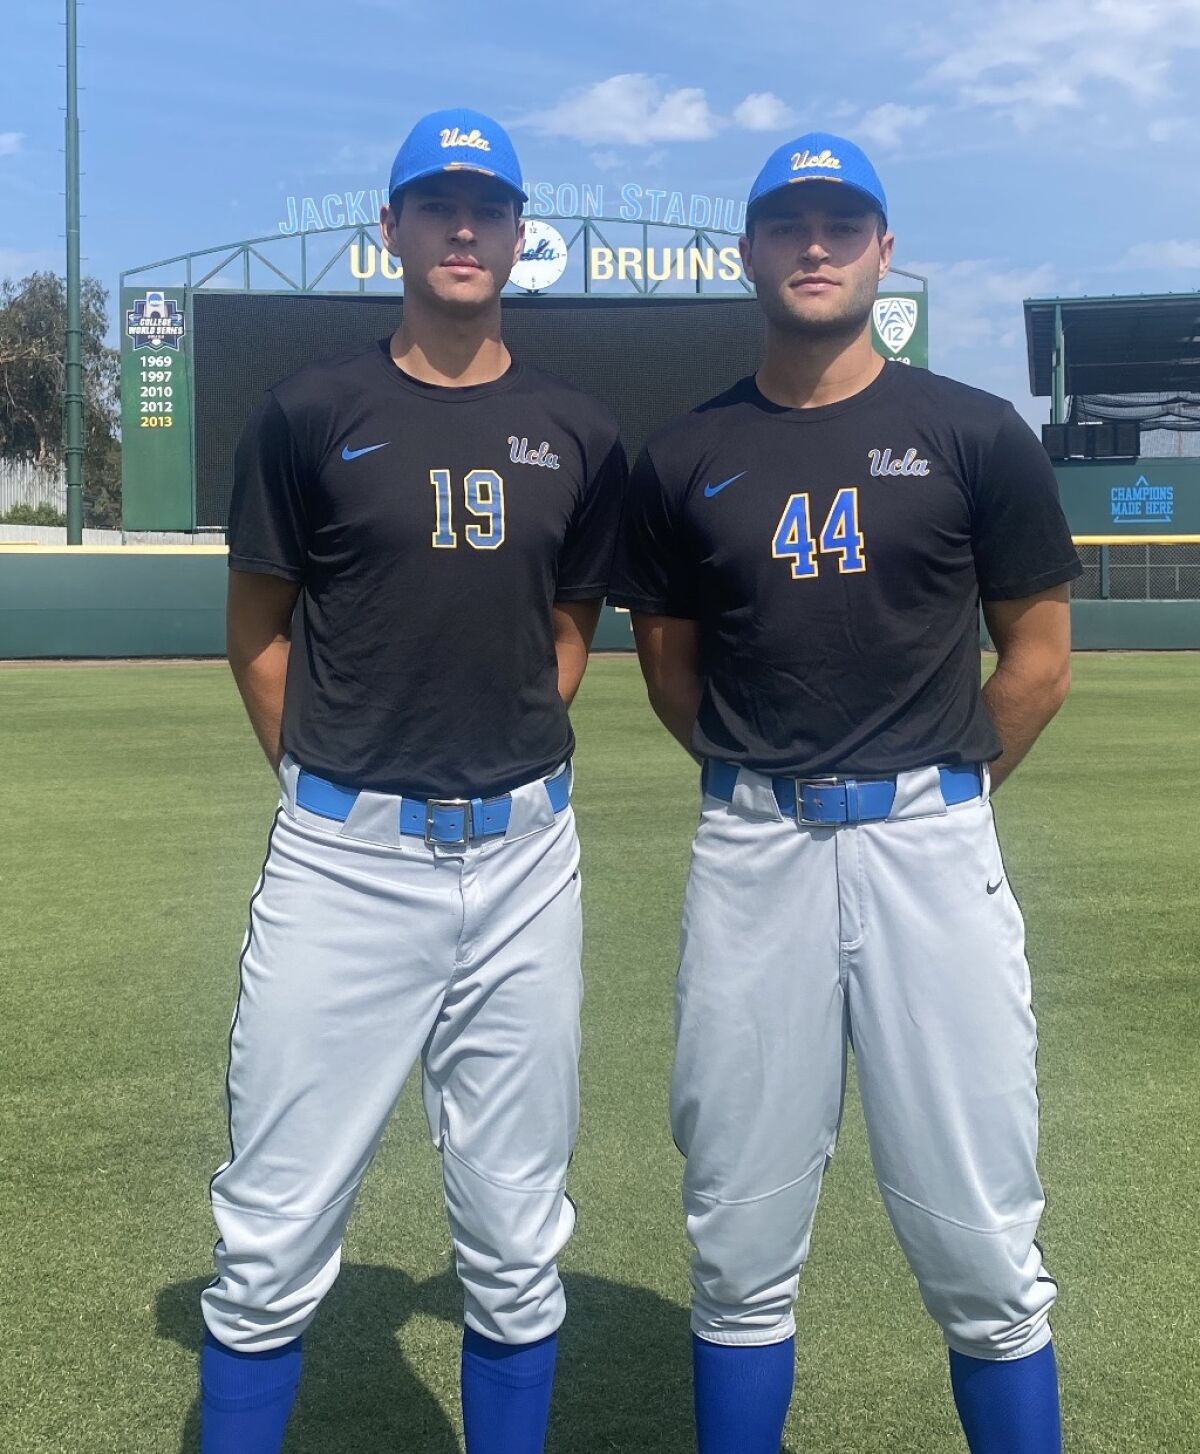 Brothers Jared and Kyle Karros should have a great season for UCLA baseball.